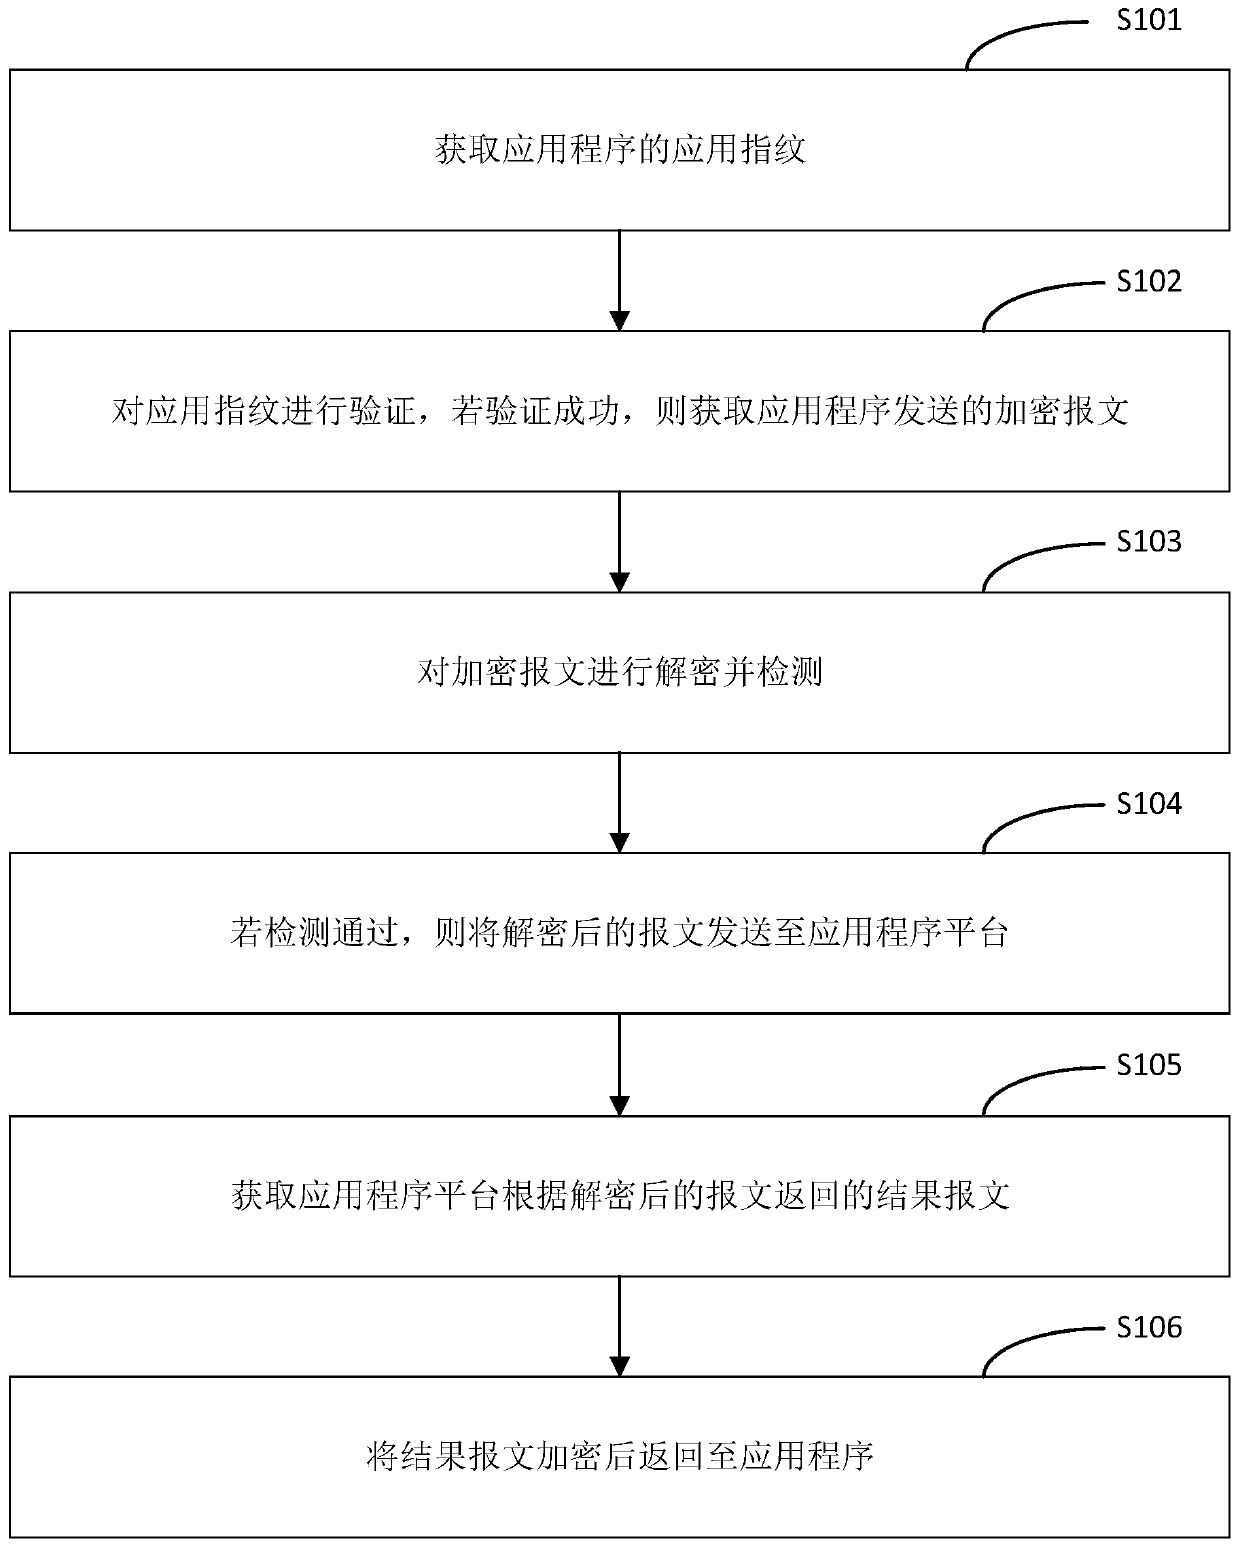 Message transmission method and device, network equipment and storage medium